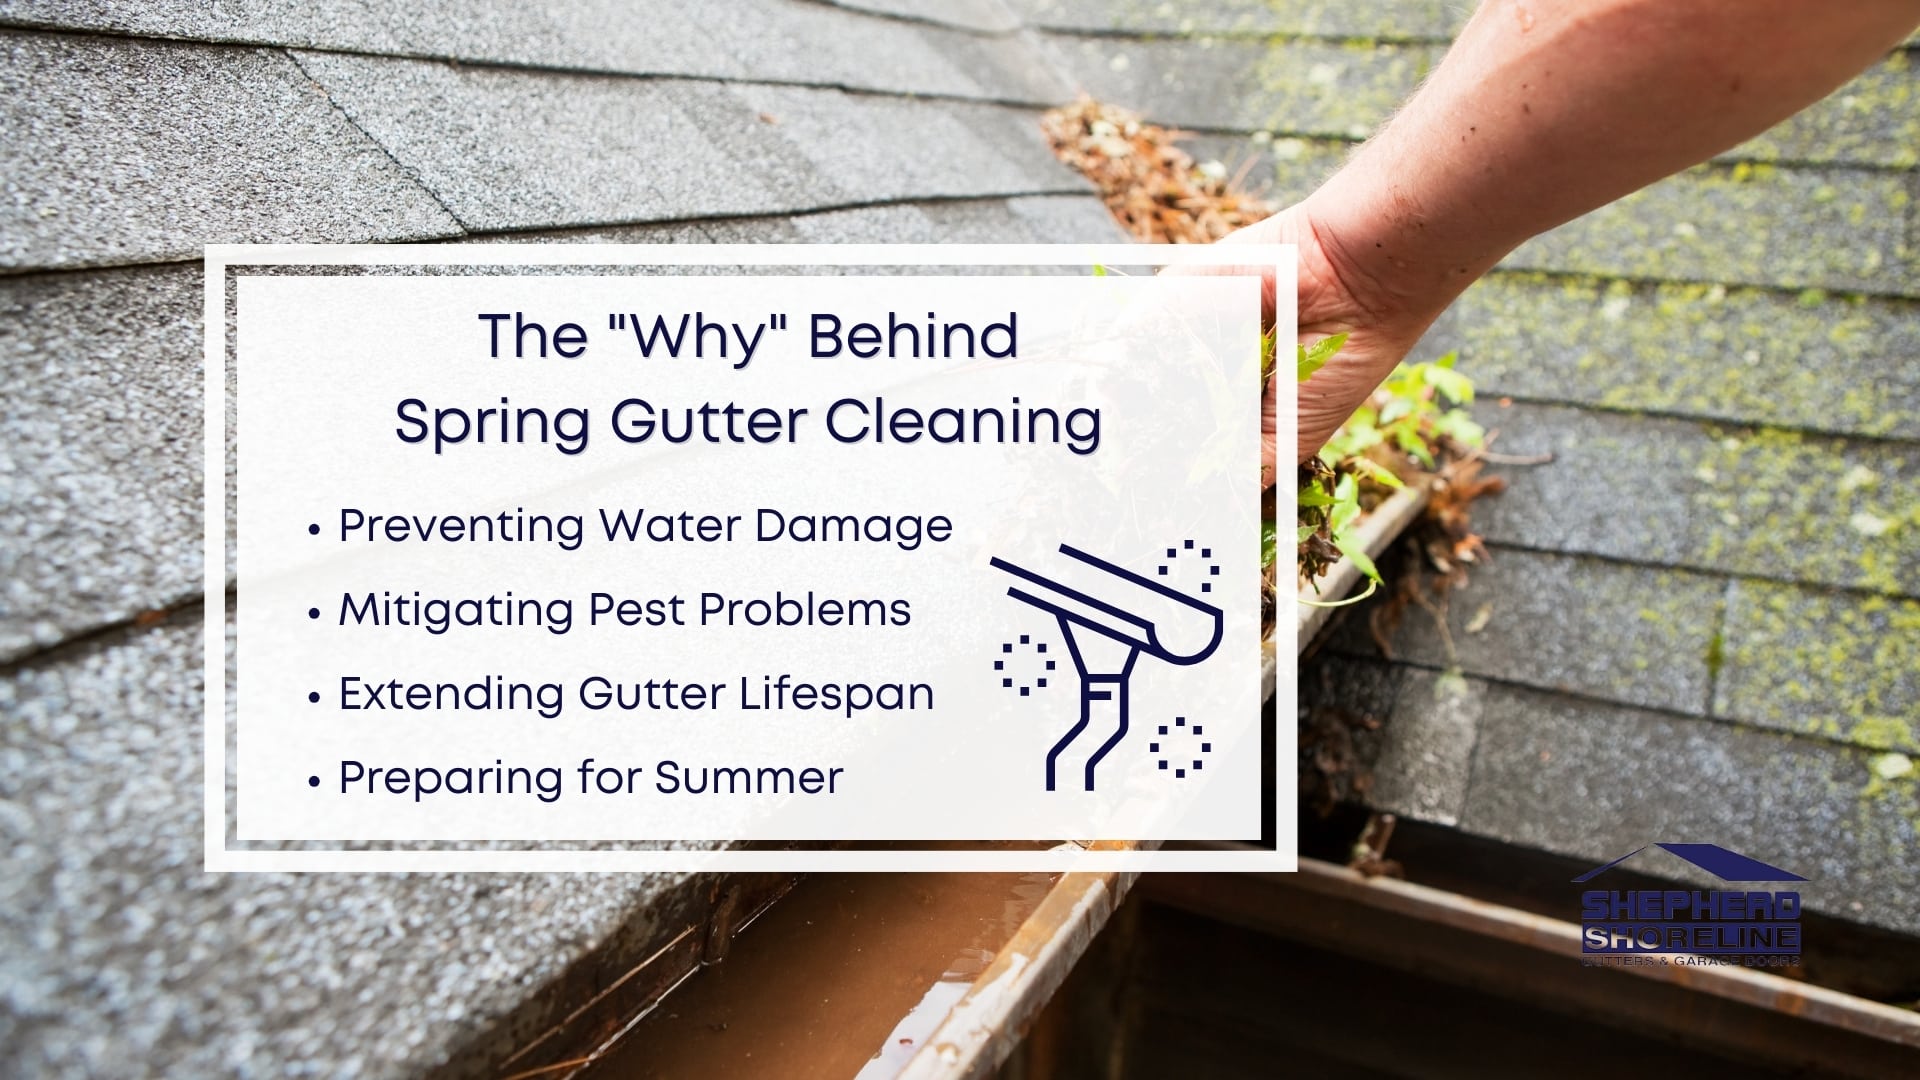 Infographic image of the "Why" behind spring gutter cleaning